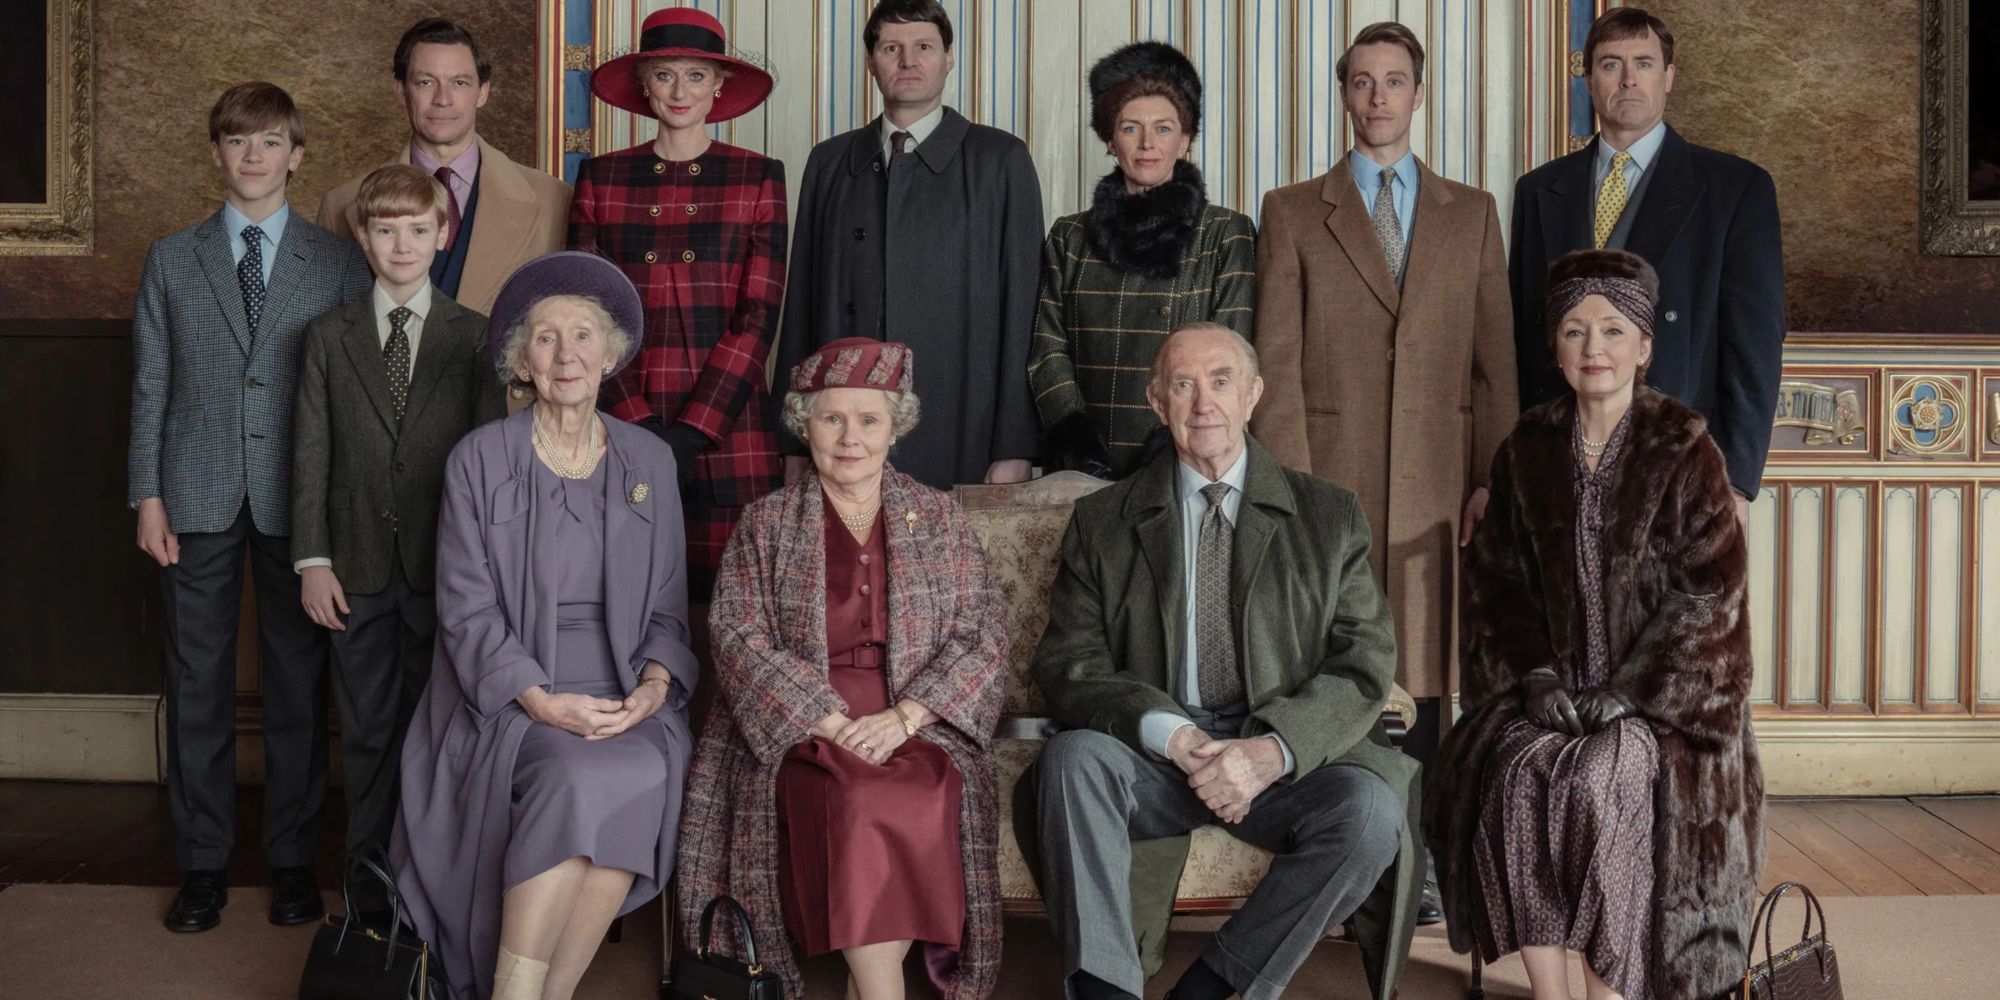 The ROyal Family posing for a photo in The Crown season 5.